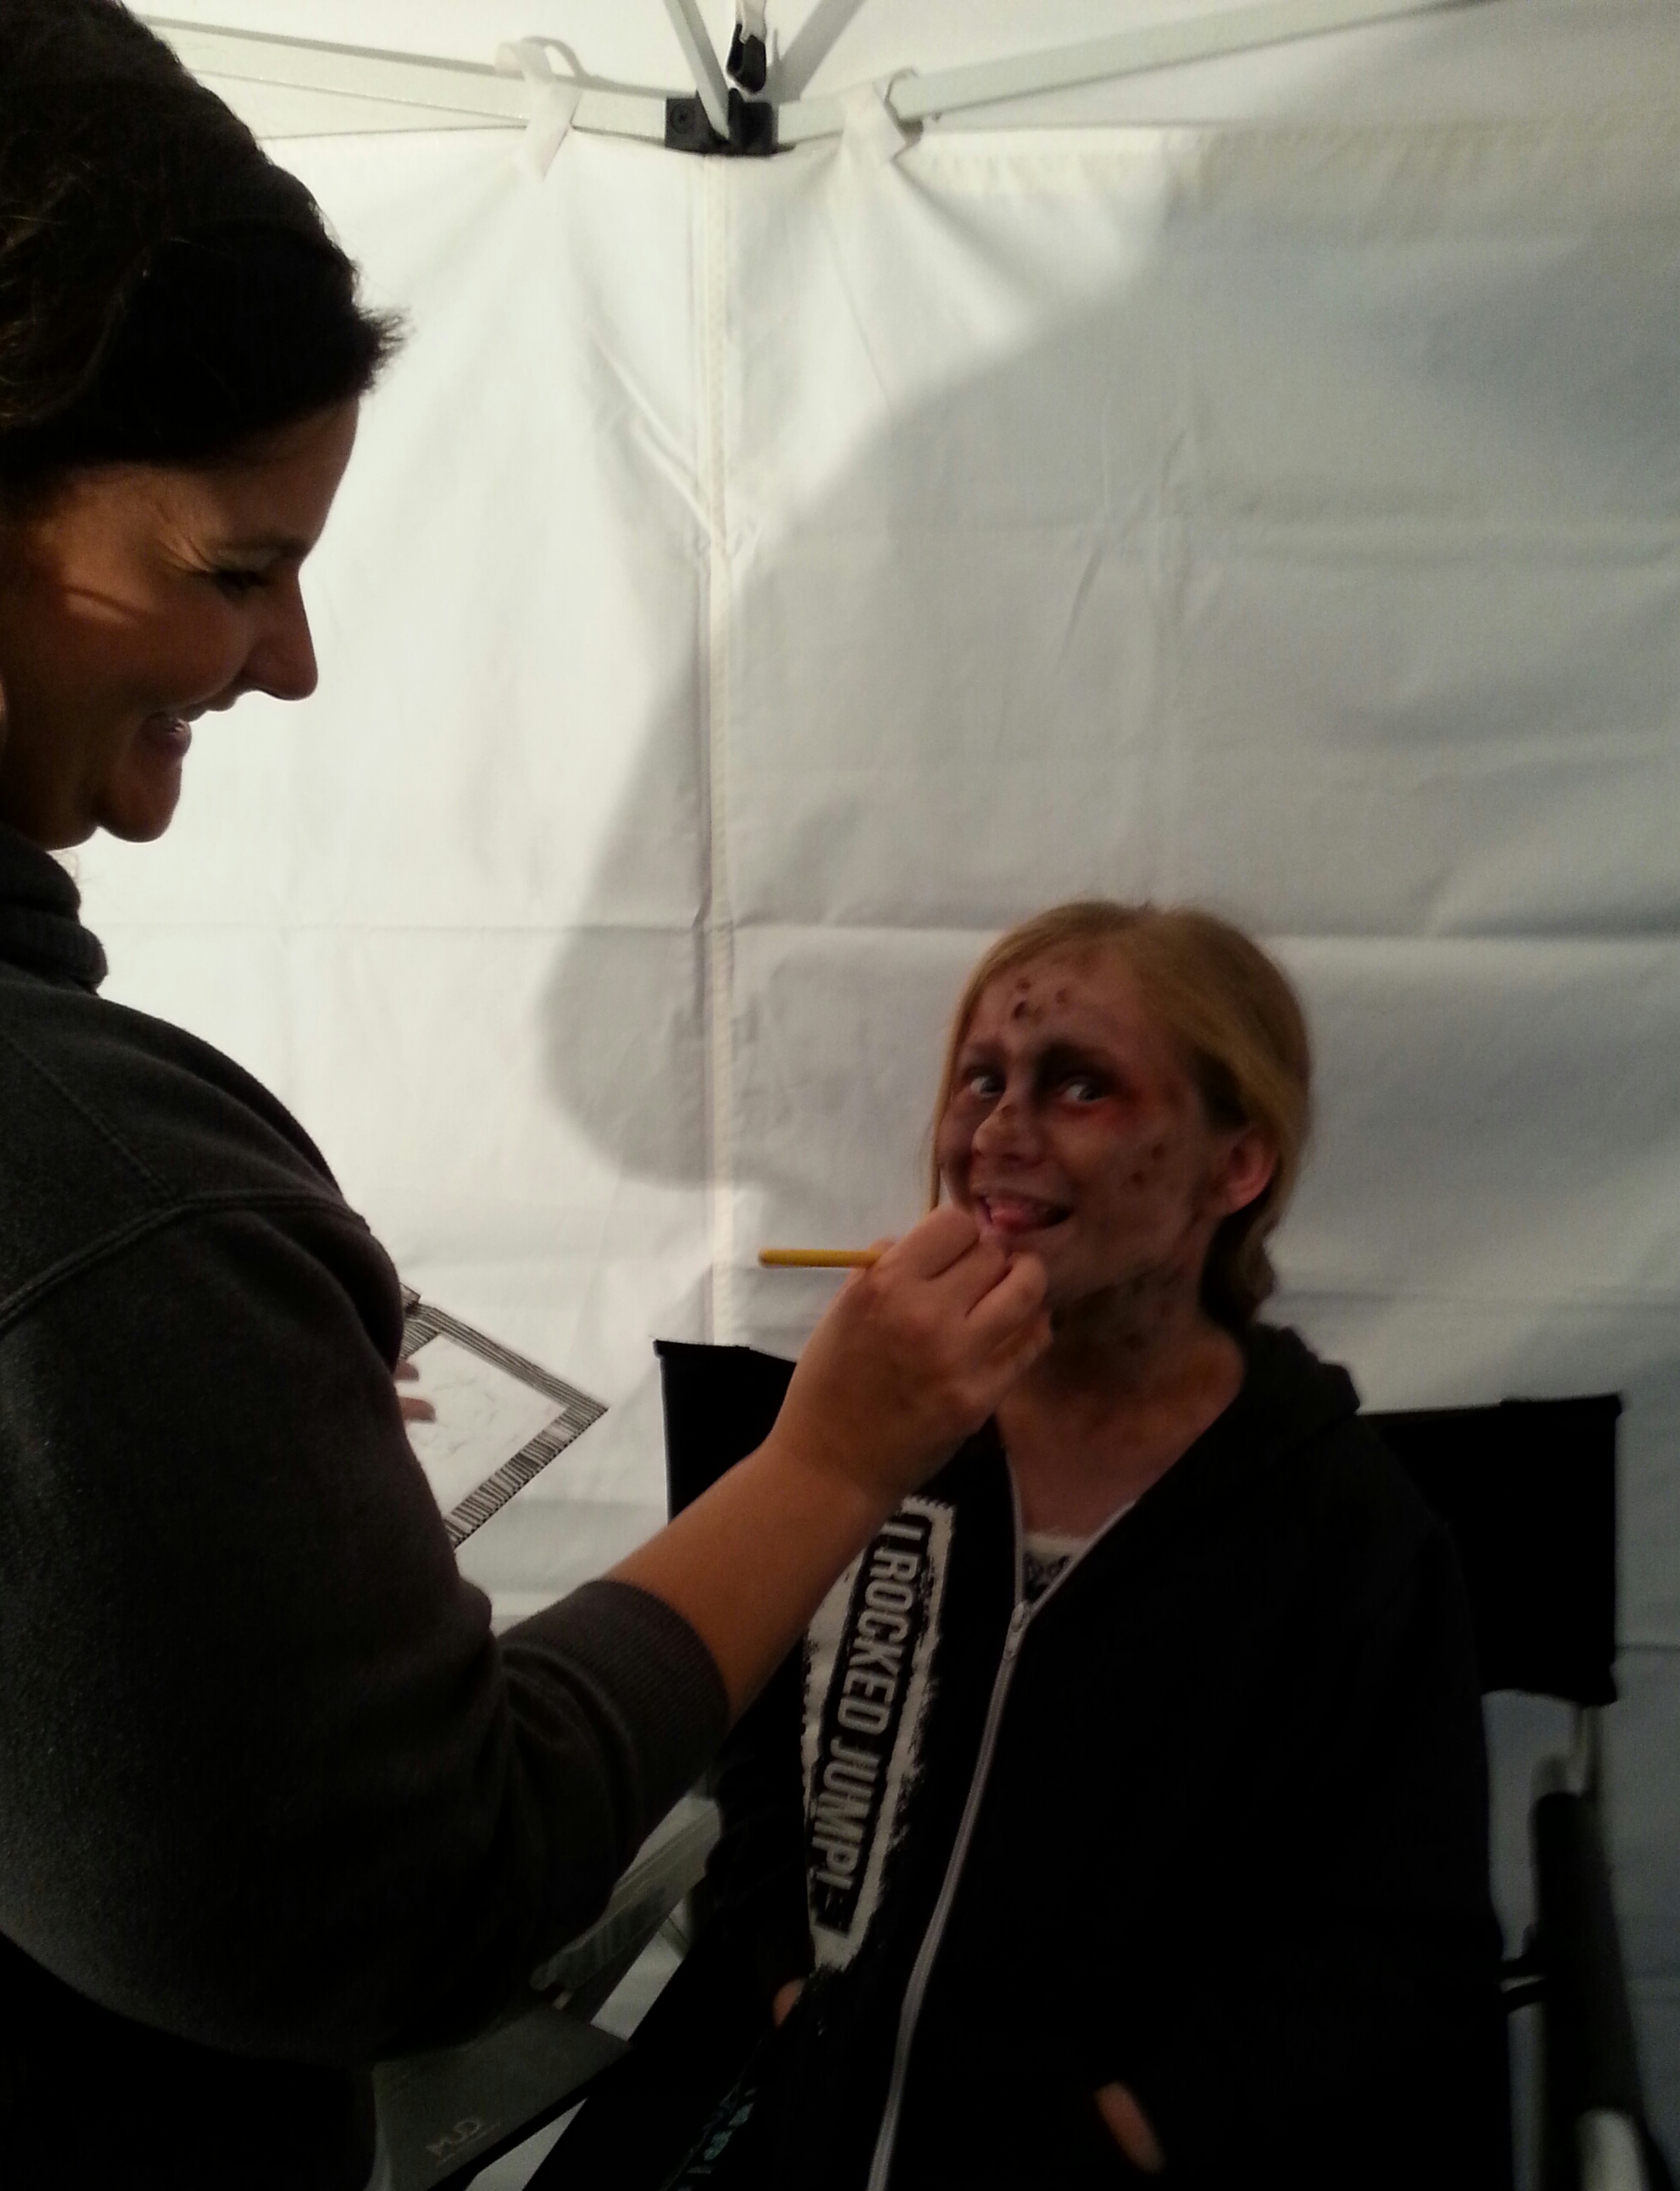 On set of My Haunted House getting makeup done!